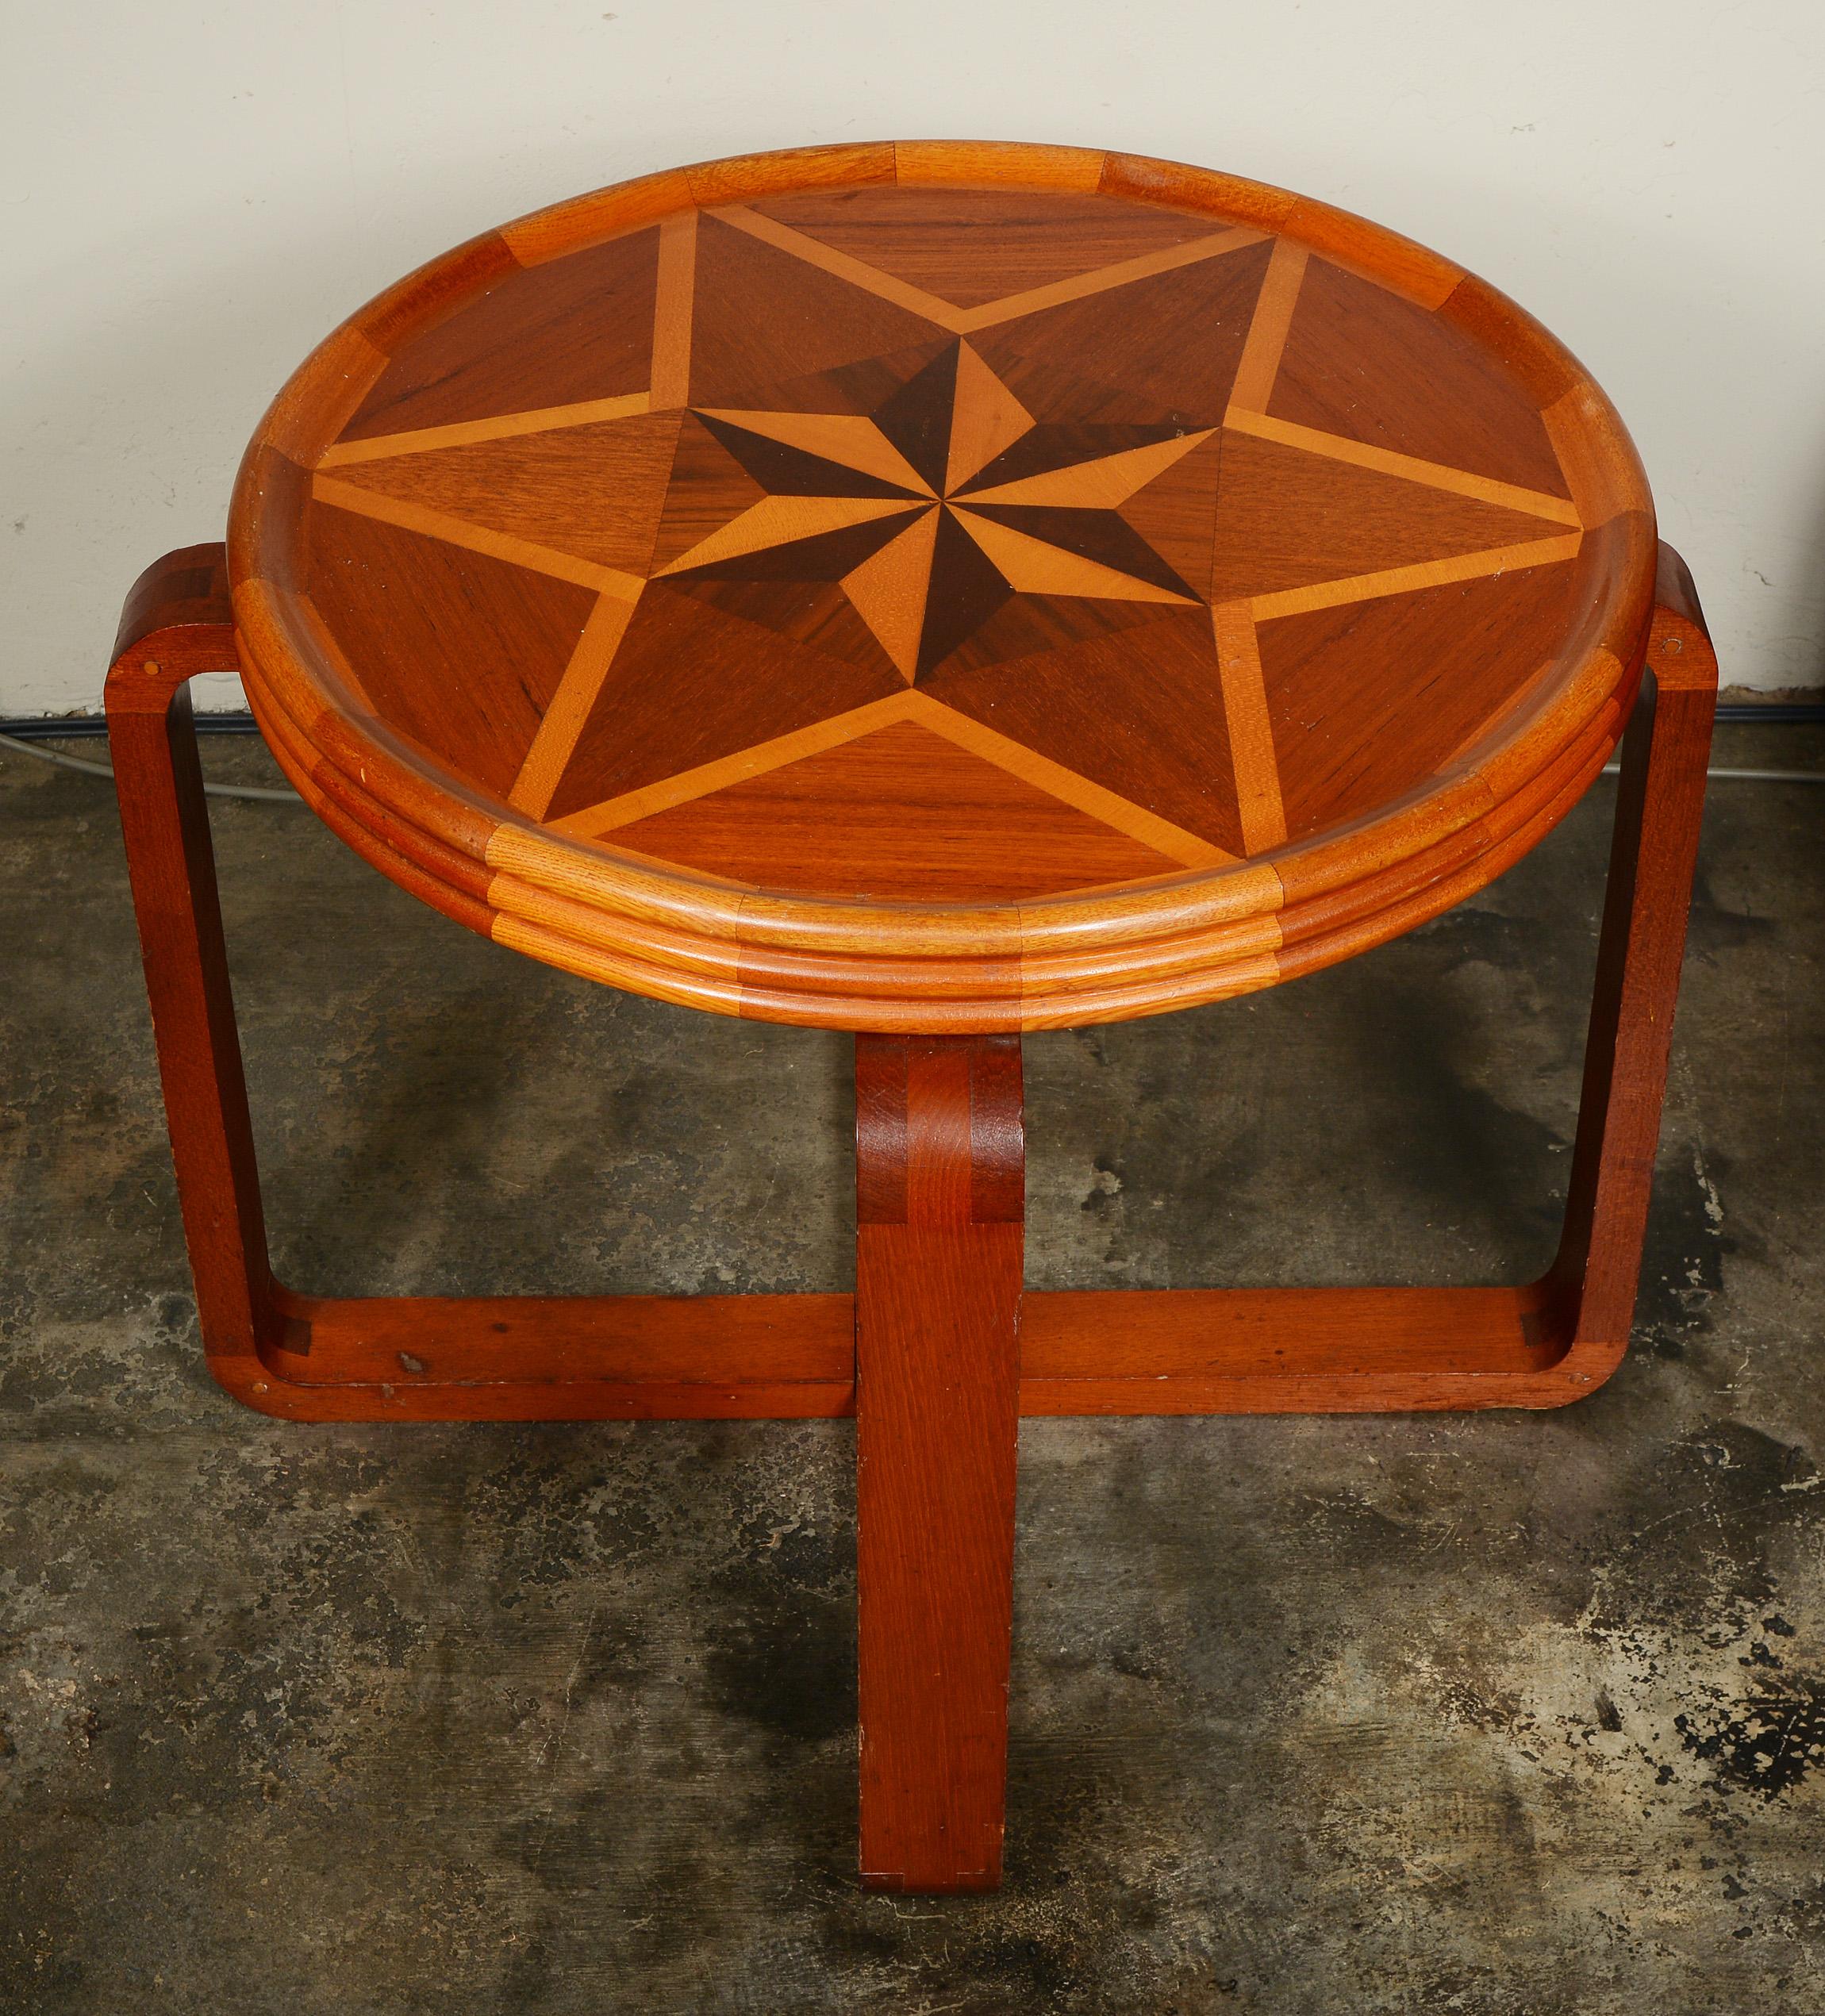 Art Deco Folk Art mahogany end table. This table probably dates to the 1940s or 1950s and was made by someone with better than average woodworking skills. The majority of the table is made with mahogany with walnut and maple inlay on the top. The